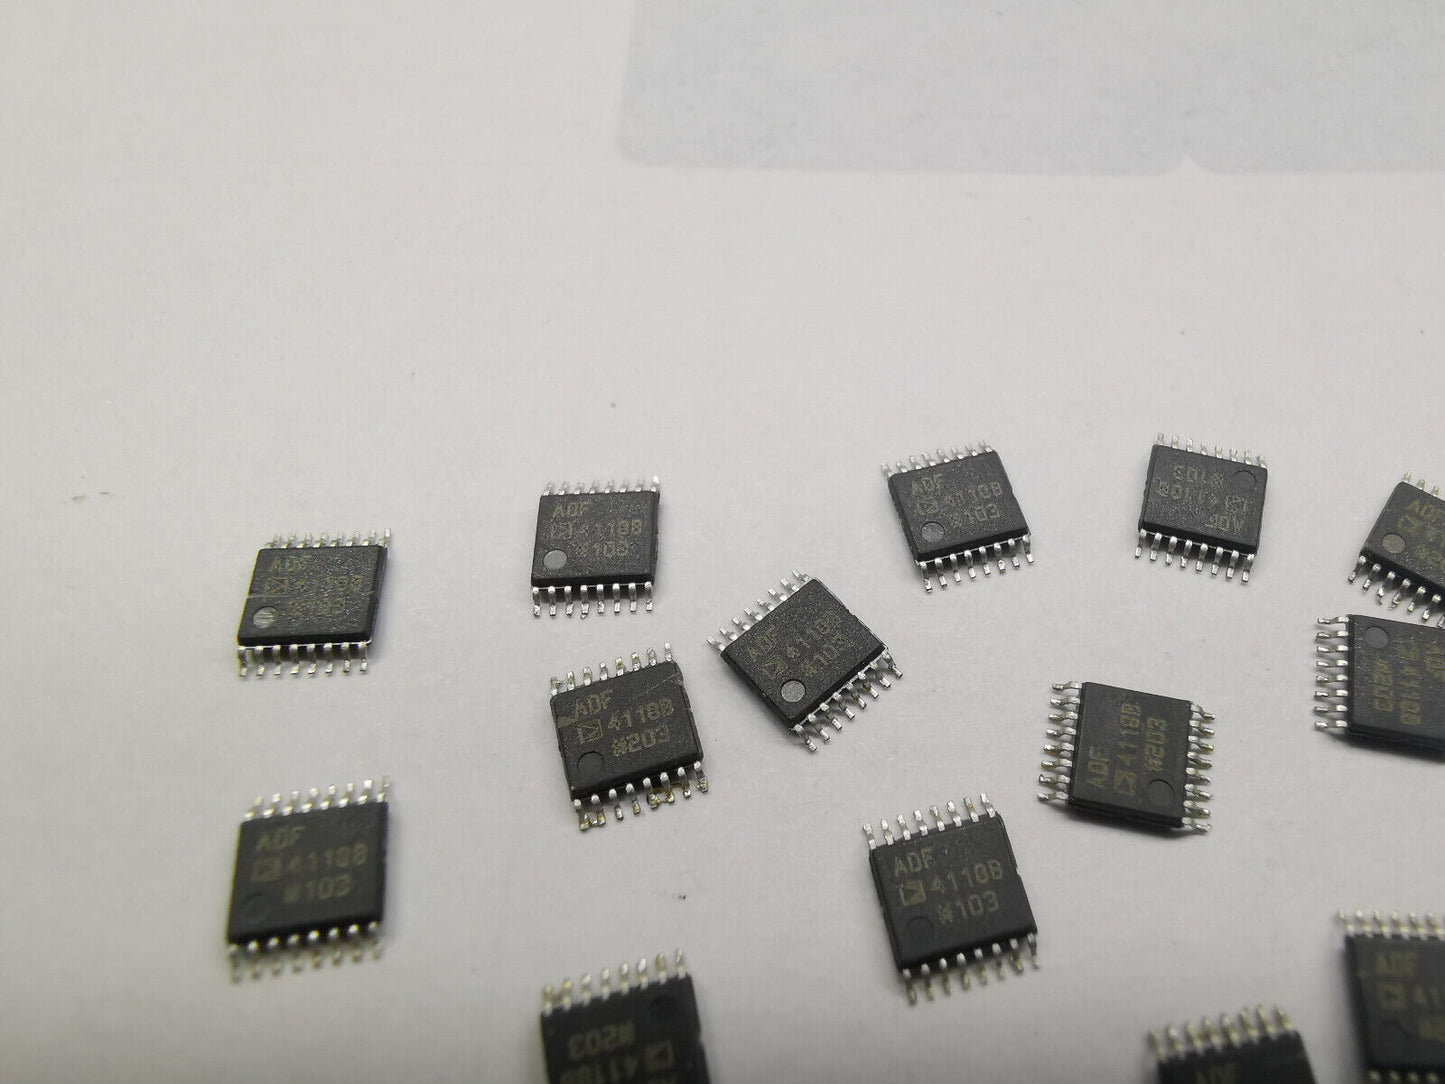 14PCS Genuine ADF4118B RF PLL Frequency Synthesizer From Military Equipment SMD